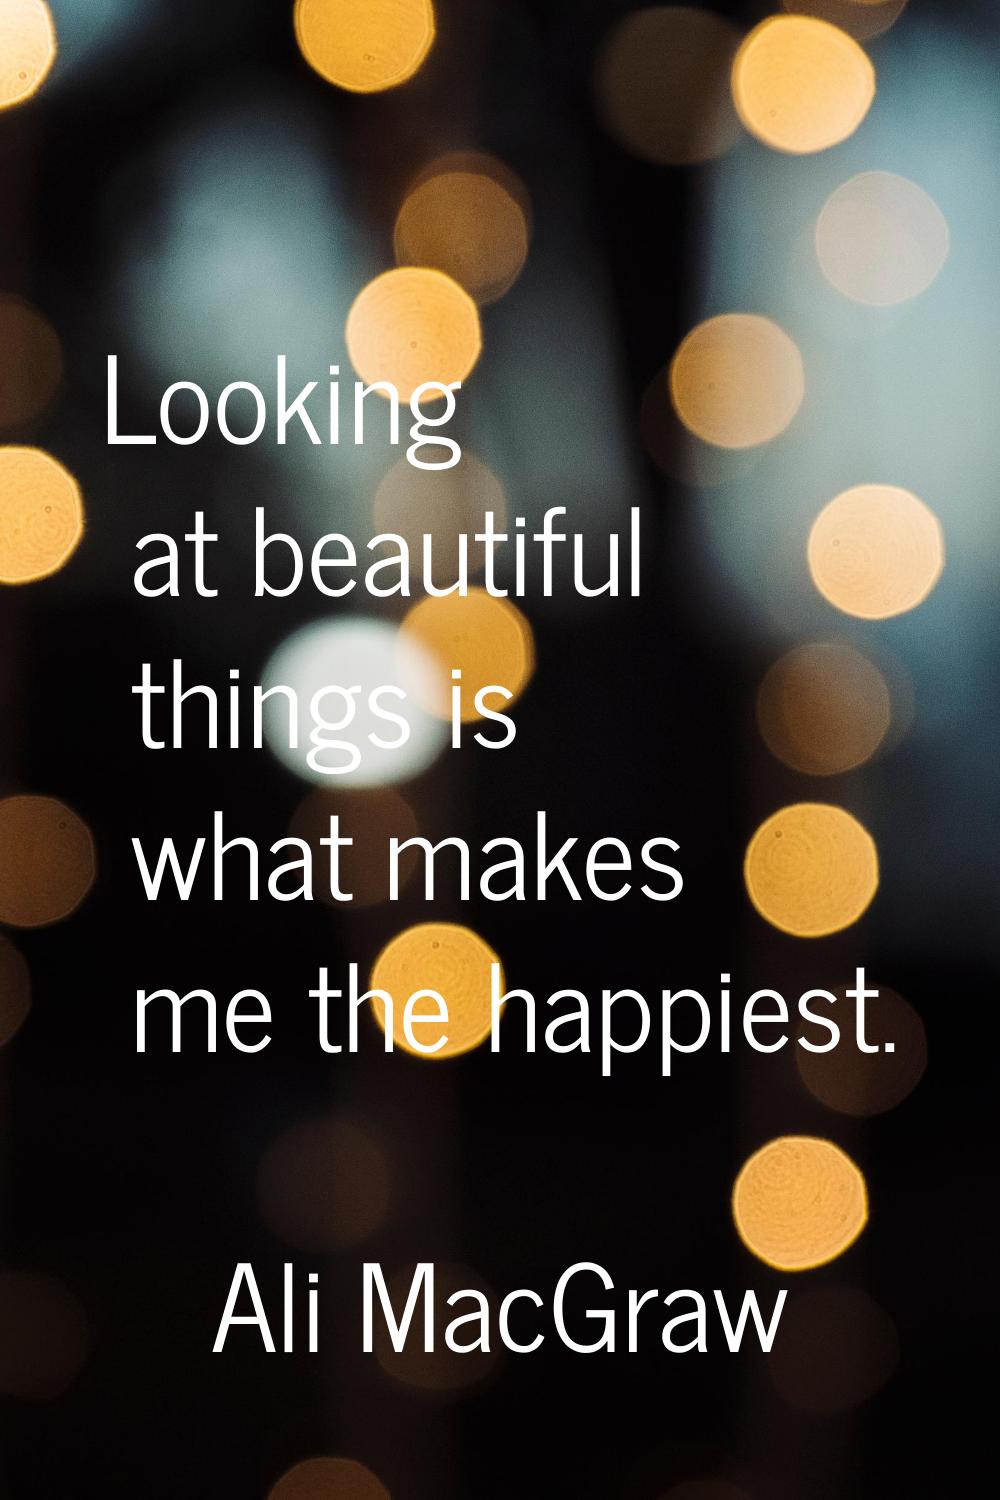 Looking at beautiful things is what makes me the happiest.